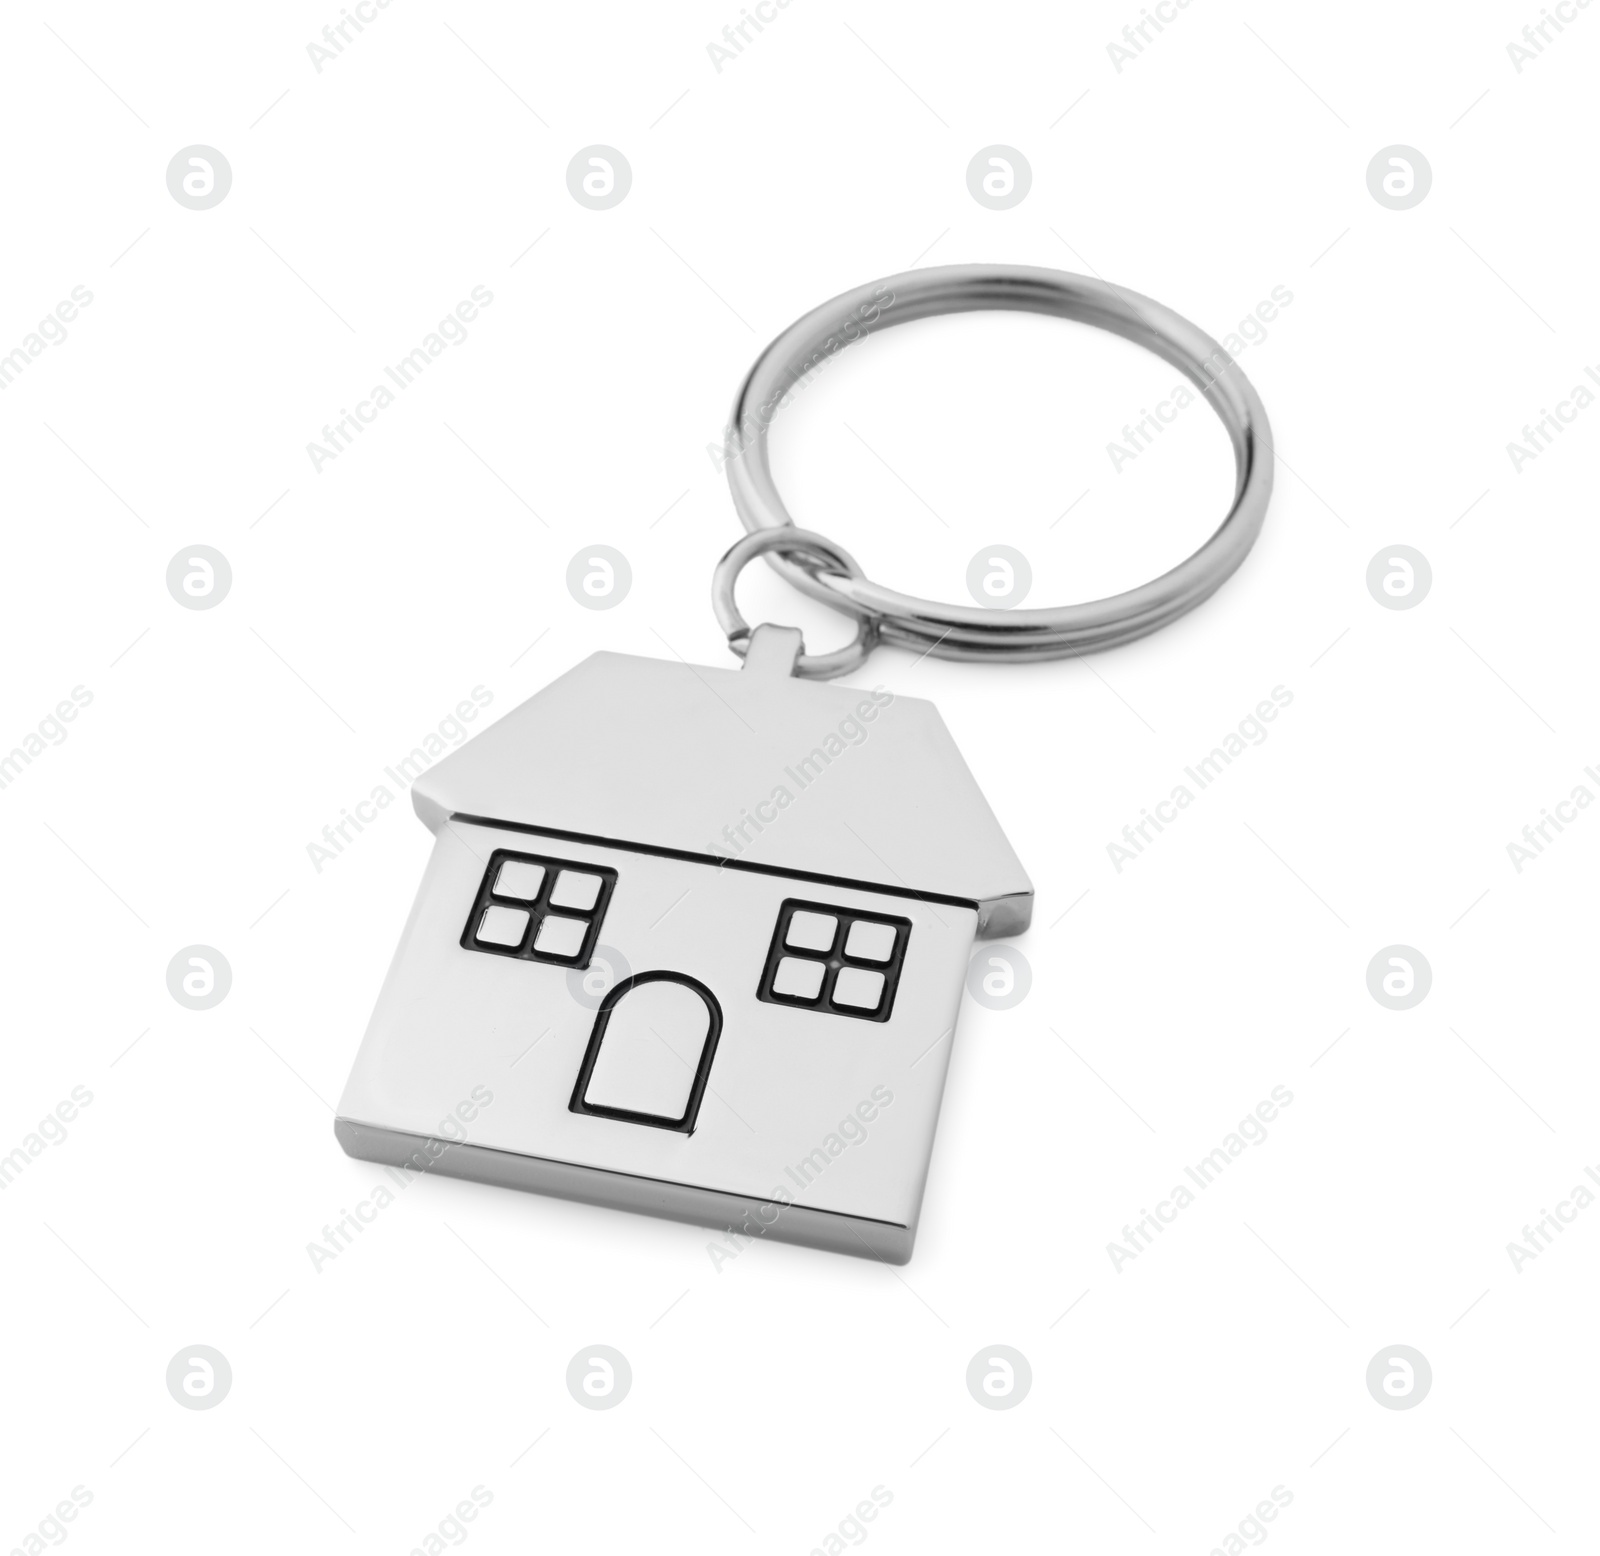 Photo of Metallic keychain in shape of house isolated on white